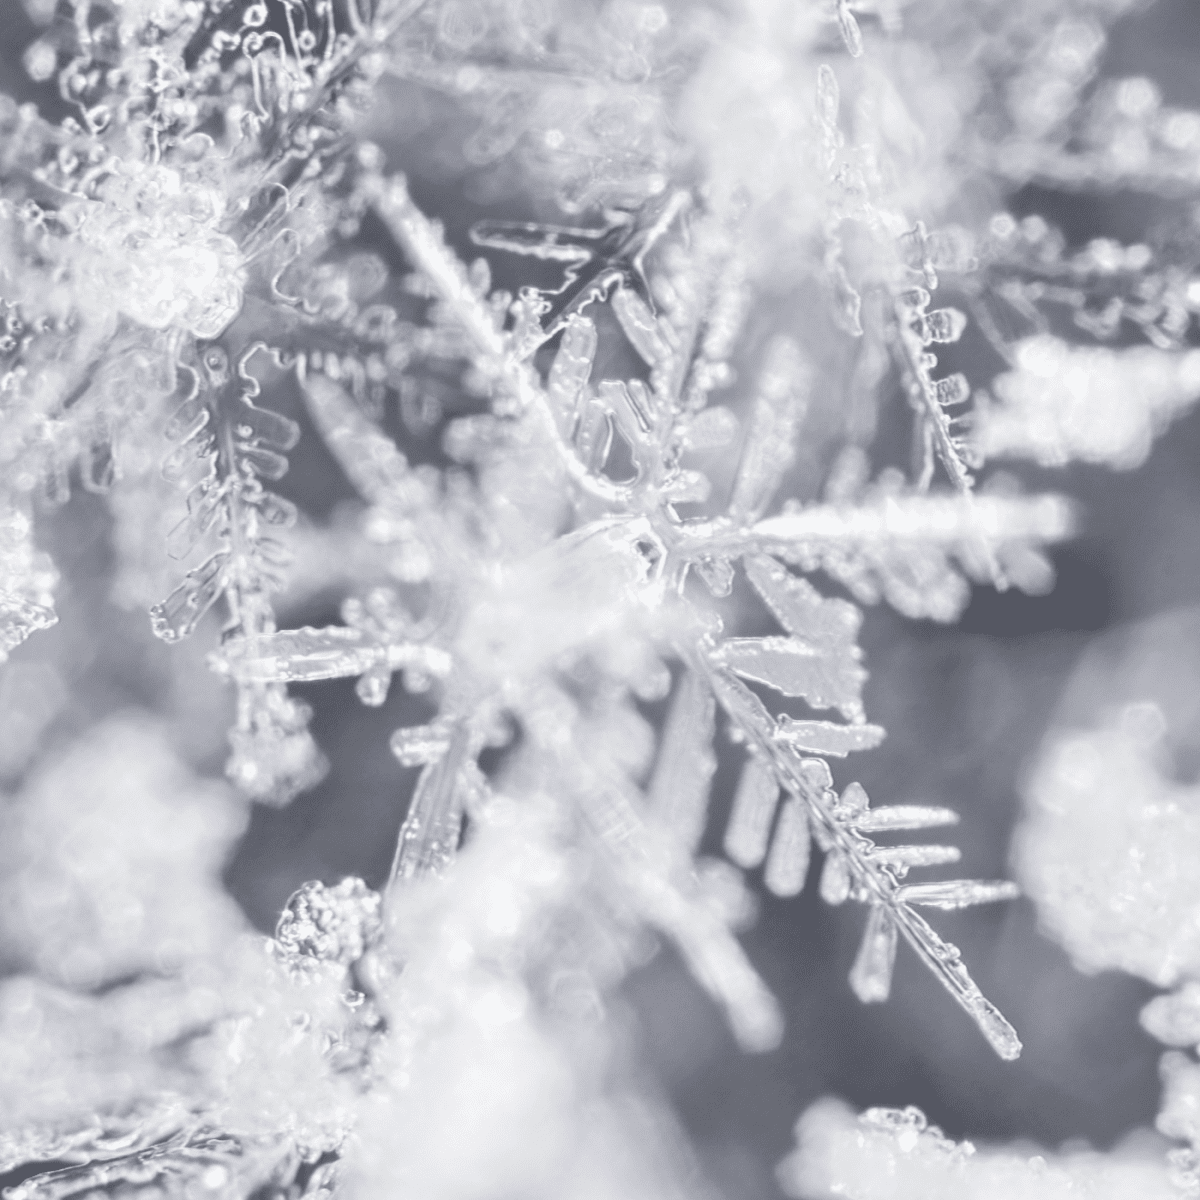 Did you know: Interesting facts about snowflakes